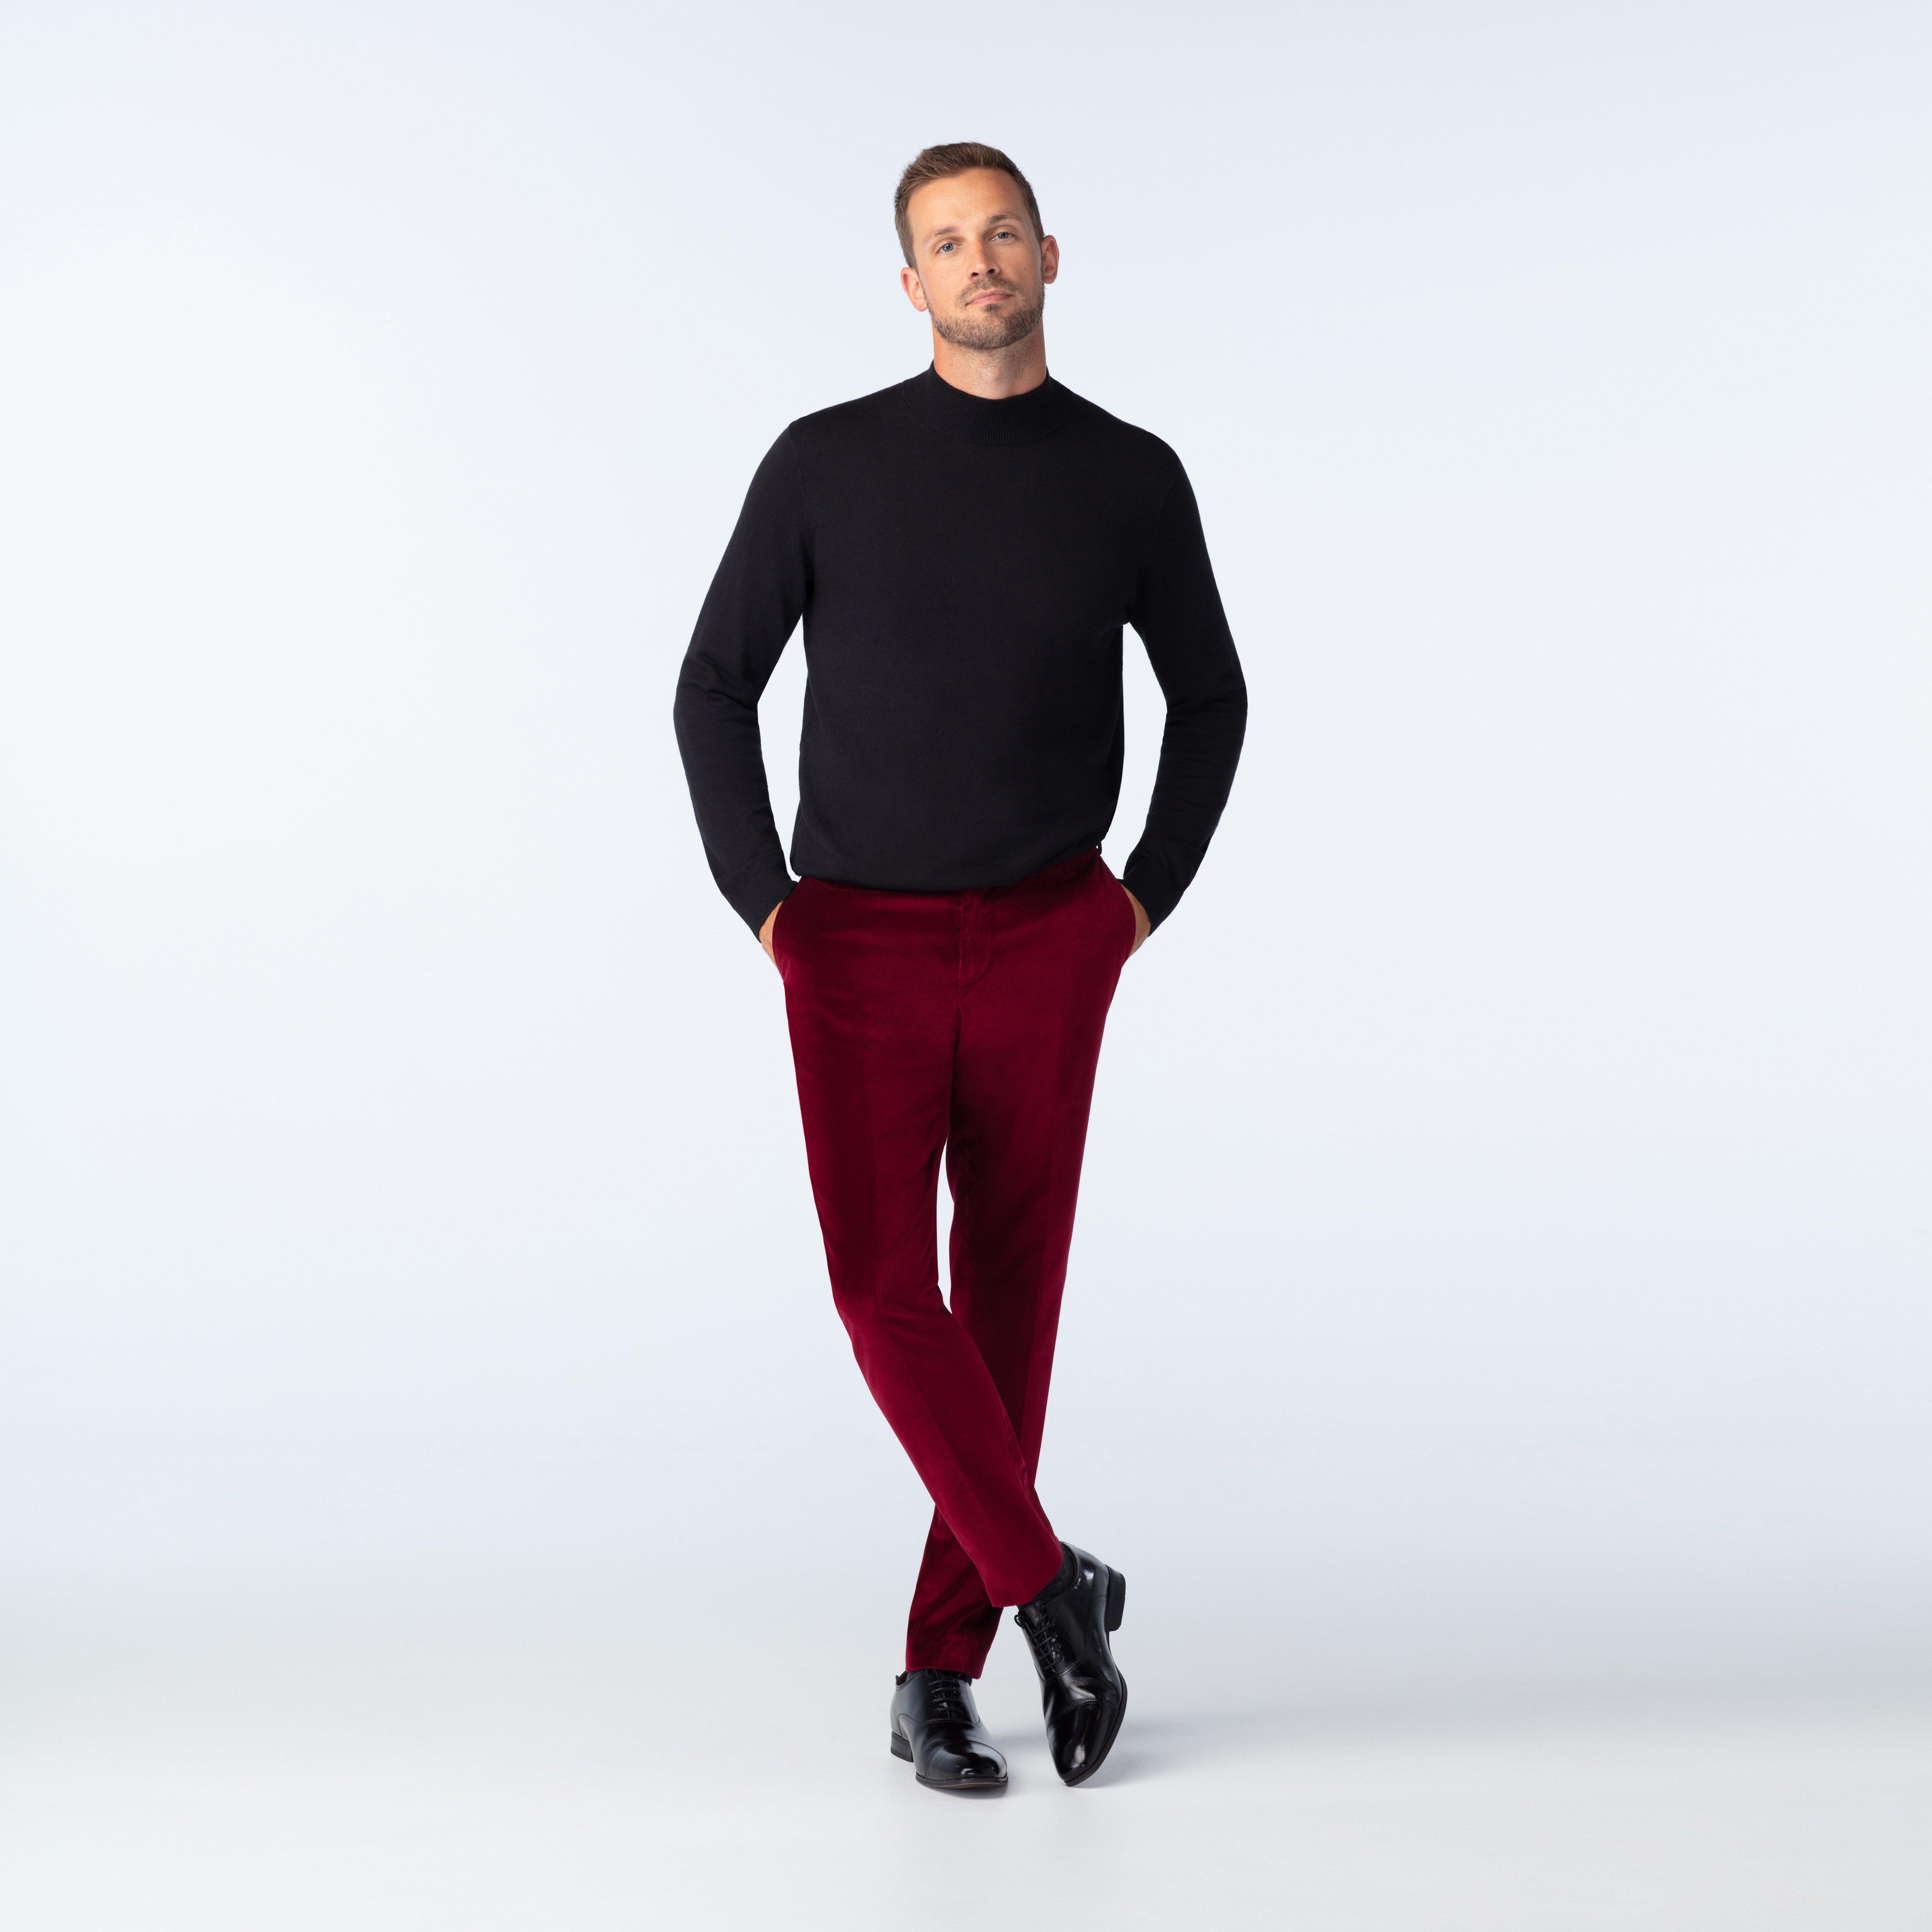 Harford Velvet Burgundy Pants (609792a3eeccc8477c393ee17a1ad763)